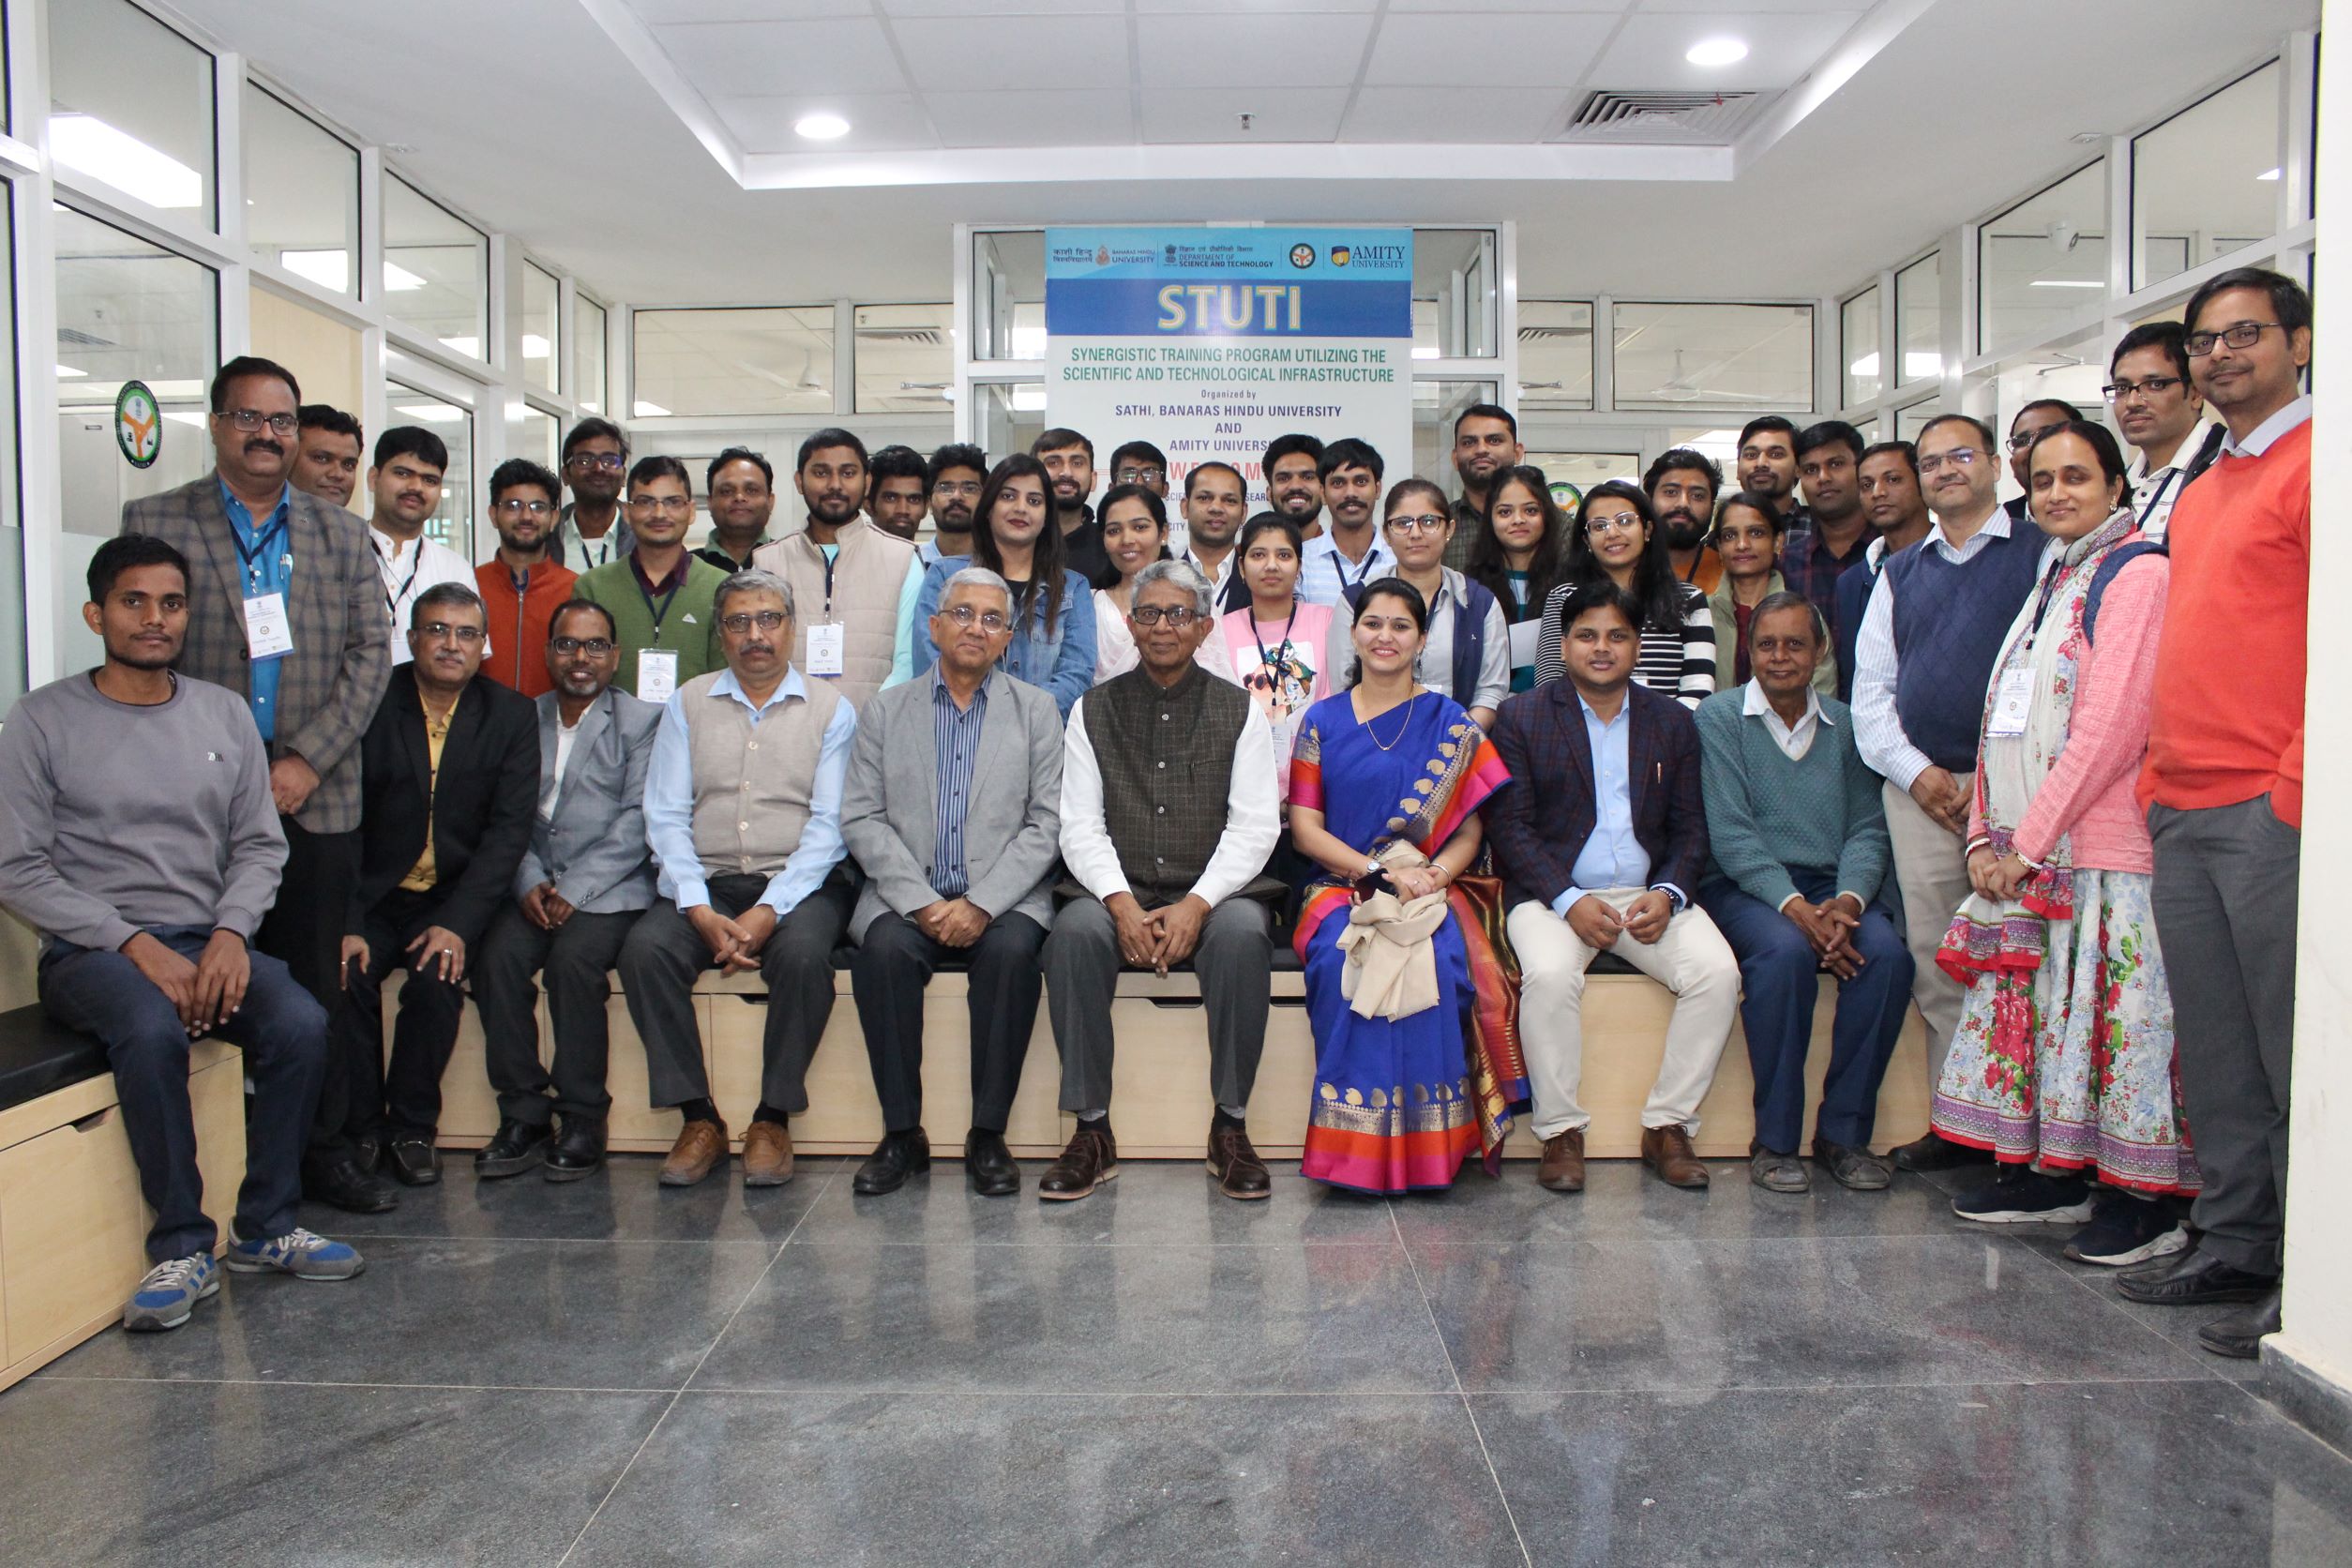 A 7-day STUTI Training Program supported by DST and organized jointly by SATHI, Banaras Hindu University and Amity University, Noida